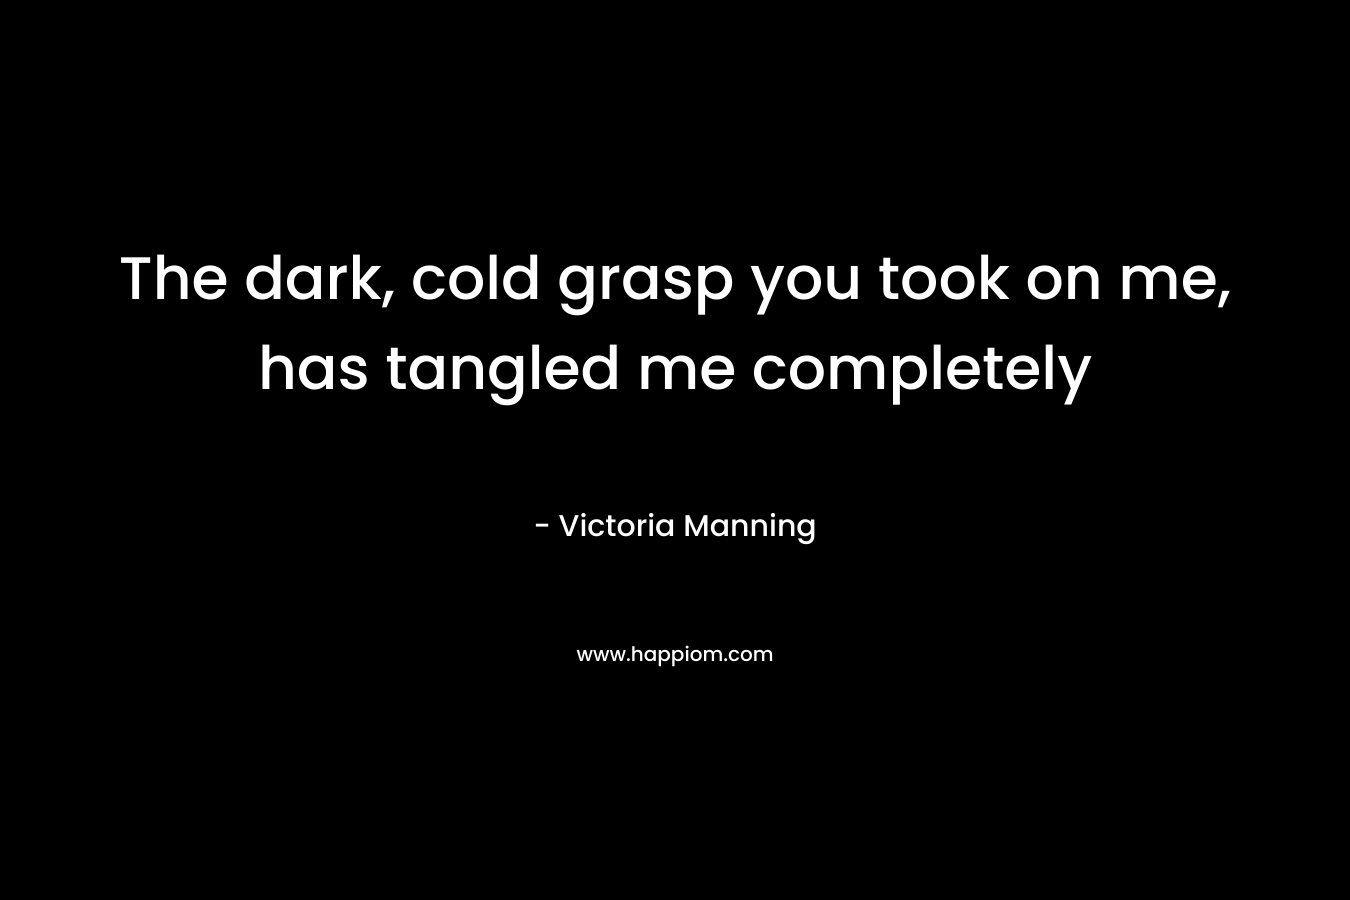 The dark, cold grasp you took on me, has tangled me completely – Victoria Manning